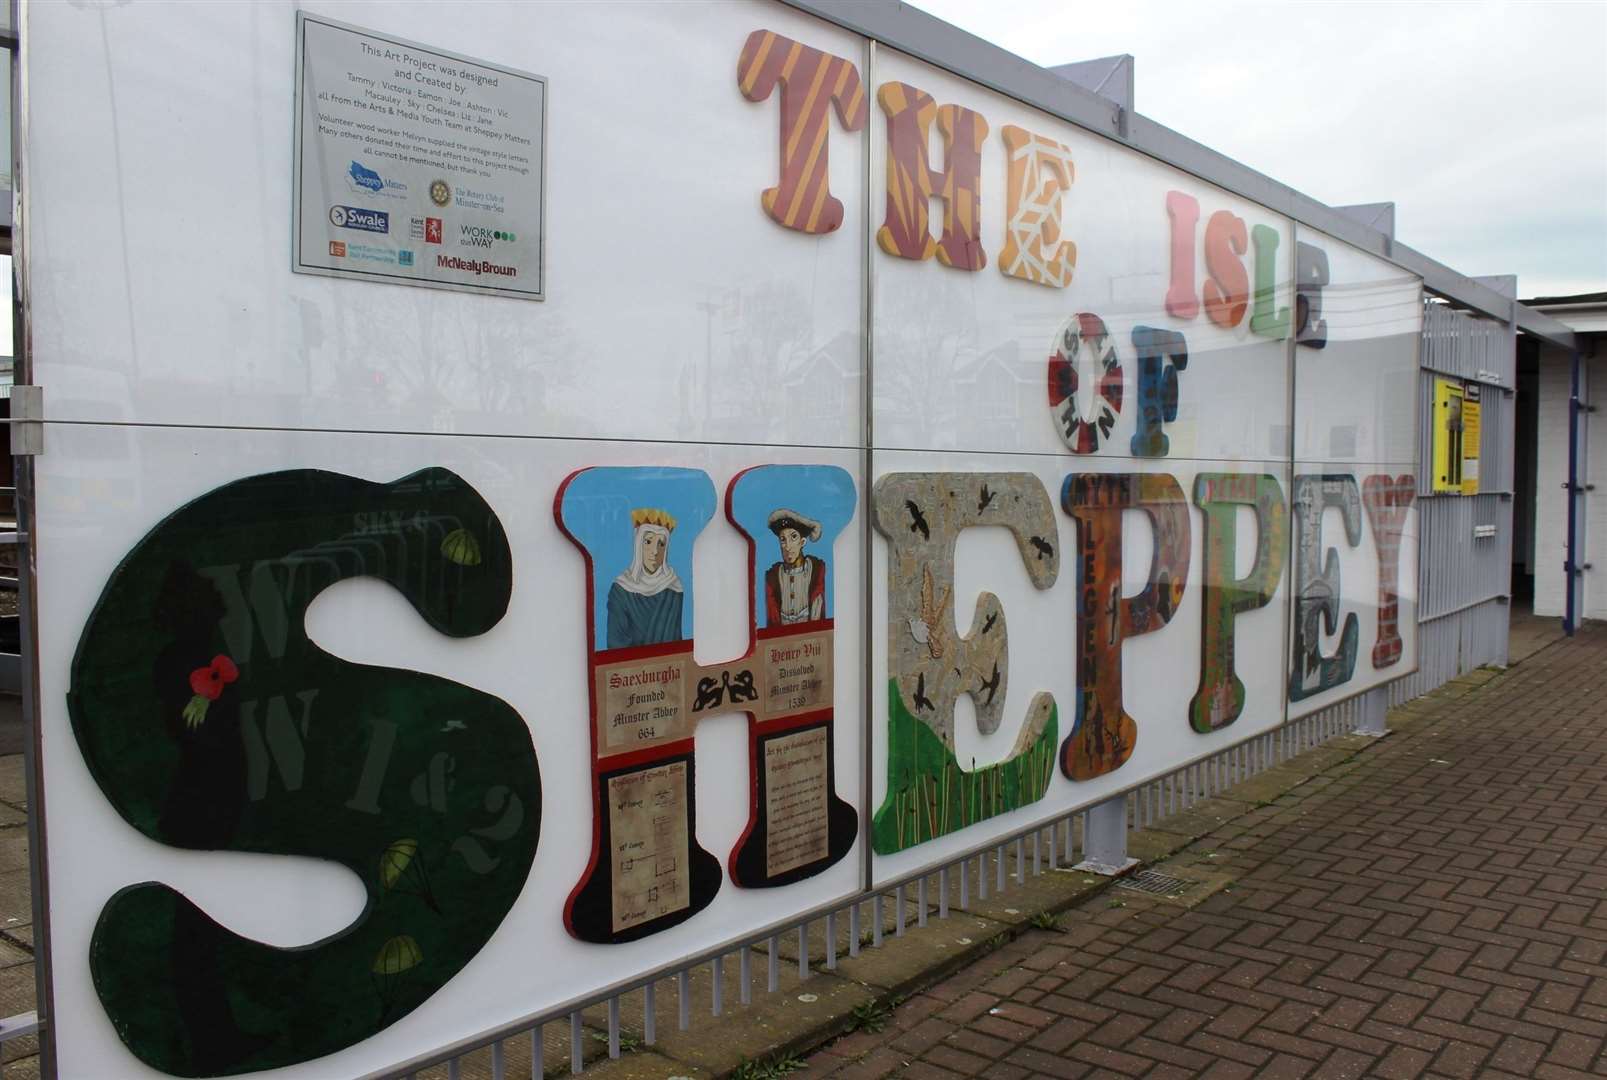 Conditions of Use: Slug: ST Shepsign 030317Caption: The Isle of Sheppey sign at Sheerness train station was officially "unveiled" by MP Gordon Henderson when he cut the ribbon on Friday (Mar 3)Location: SheernessCategory: Human InterestByline: John NurdenUploaded By: John NurdenCopyright: Blue Town Heritage CentreOriginal Caption: FM4697990 (10905118)